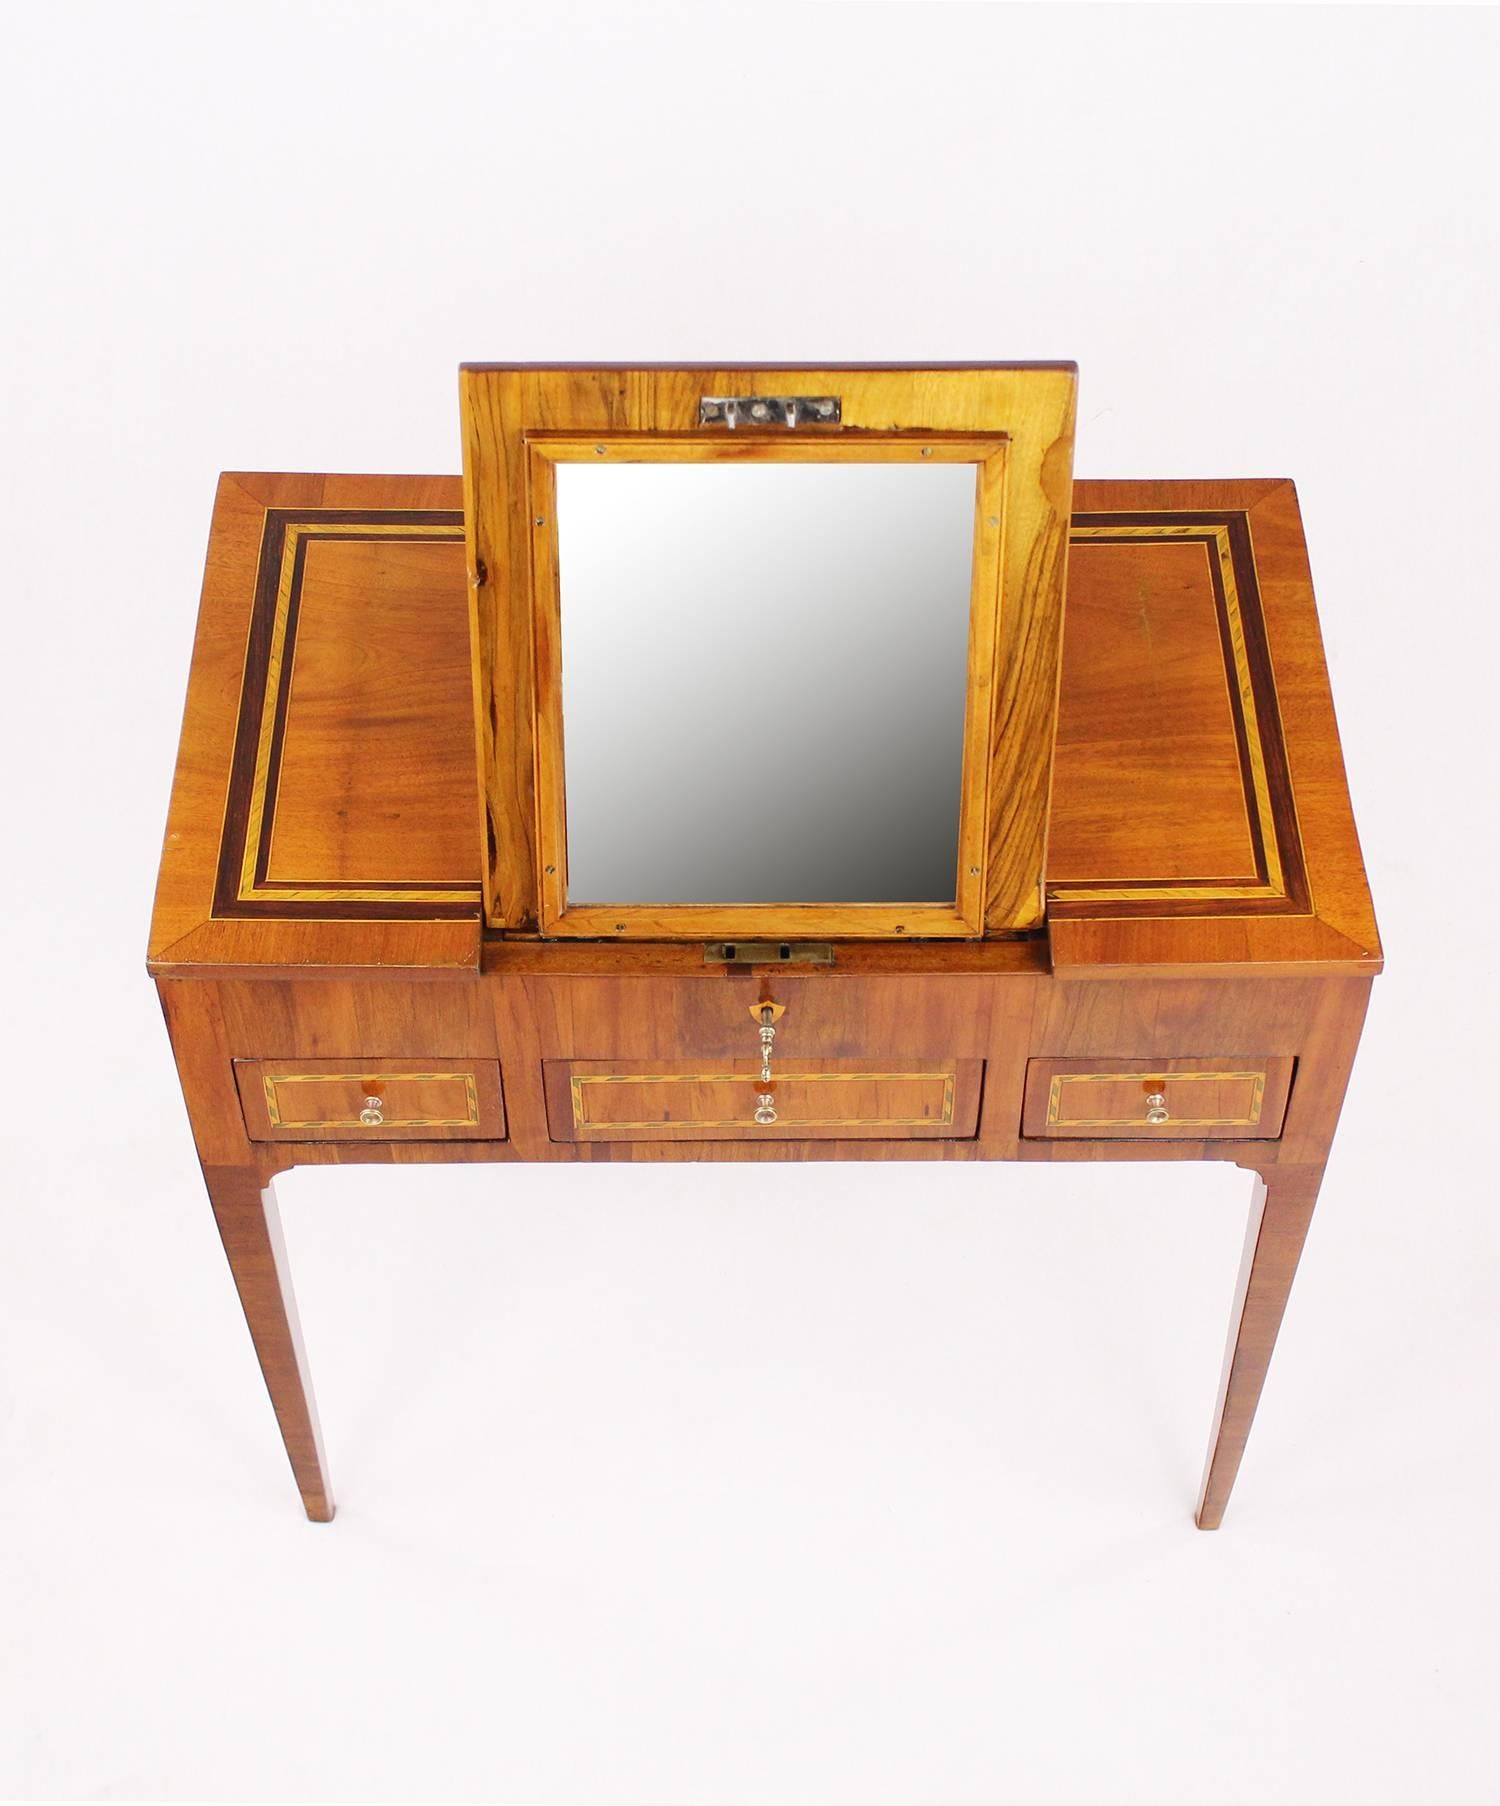 Early 19th Century Dressing Table, Poudreuse, Mahogany Veneered, Marquetry Works (Französisch)